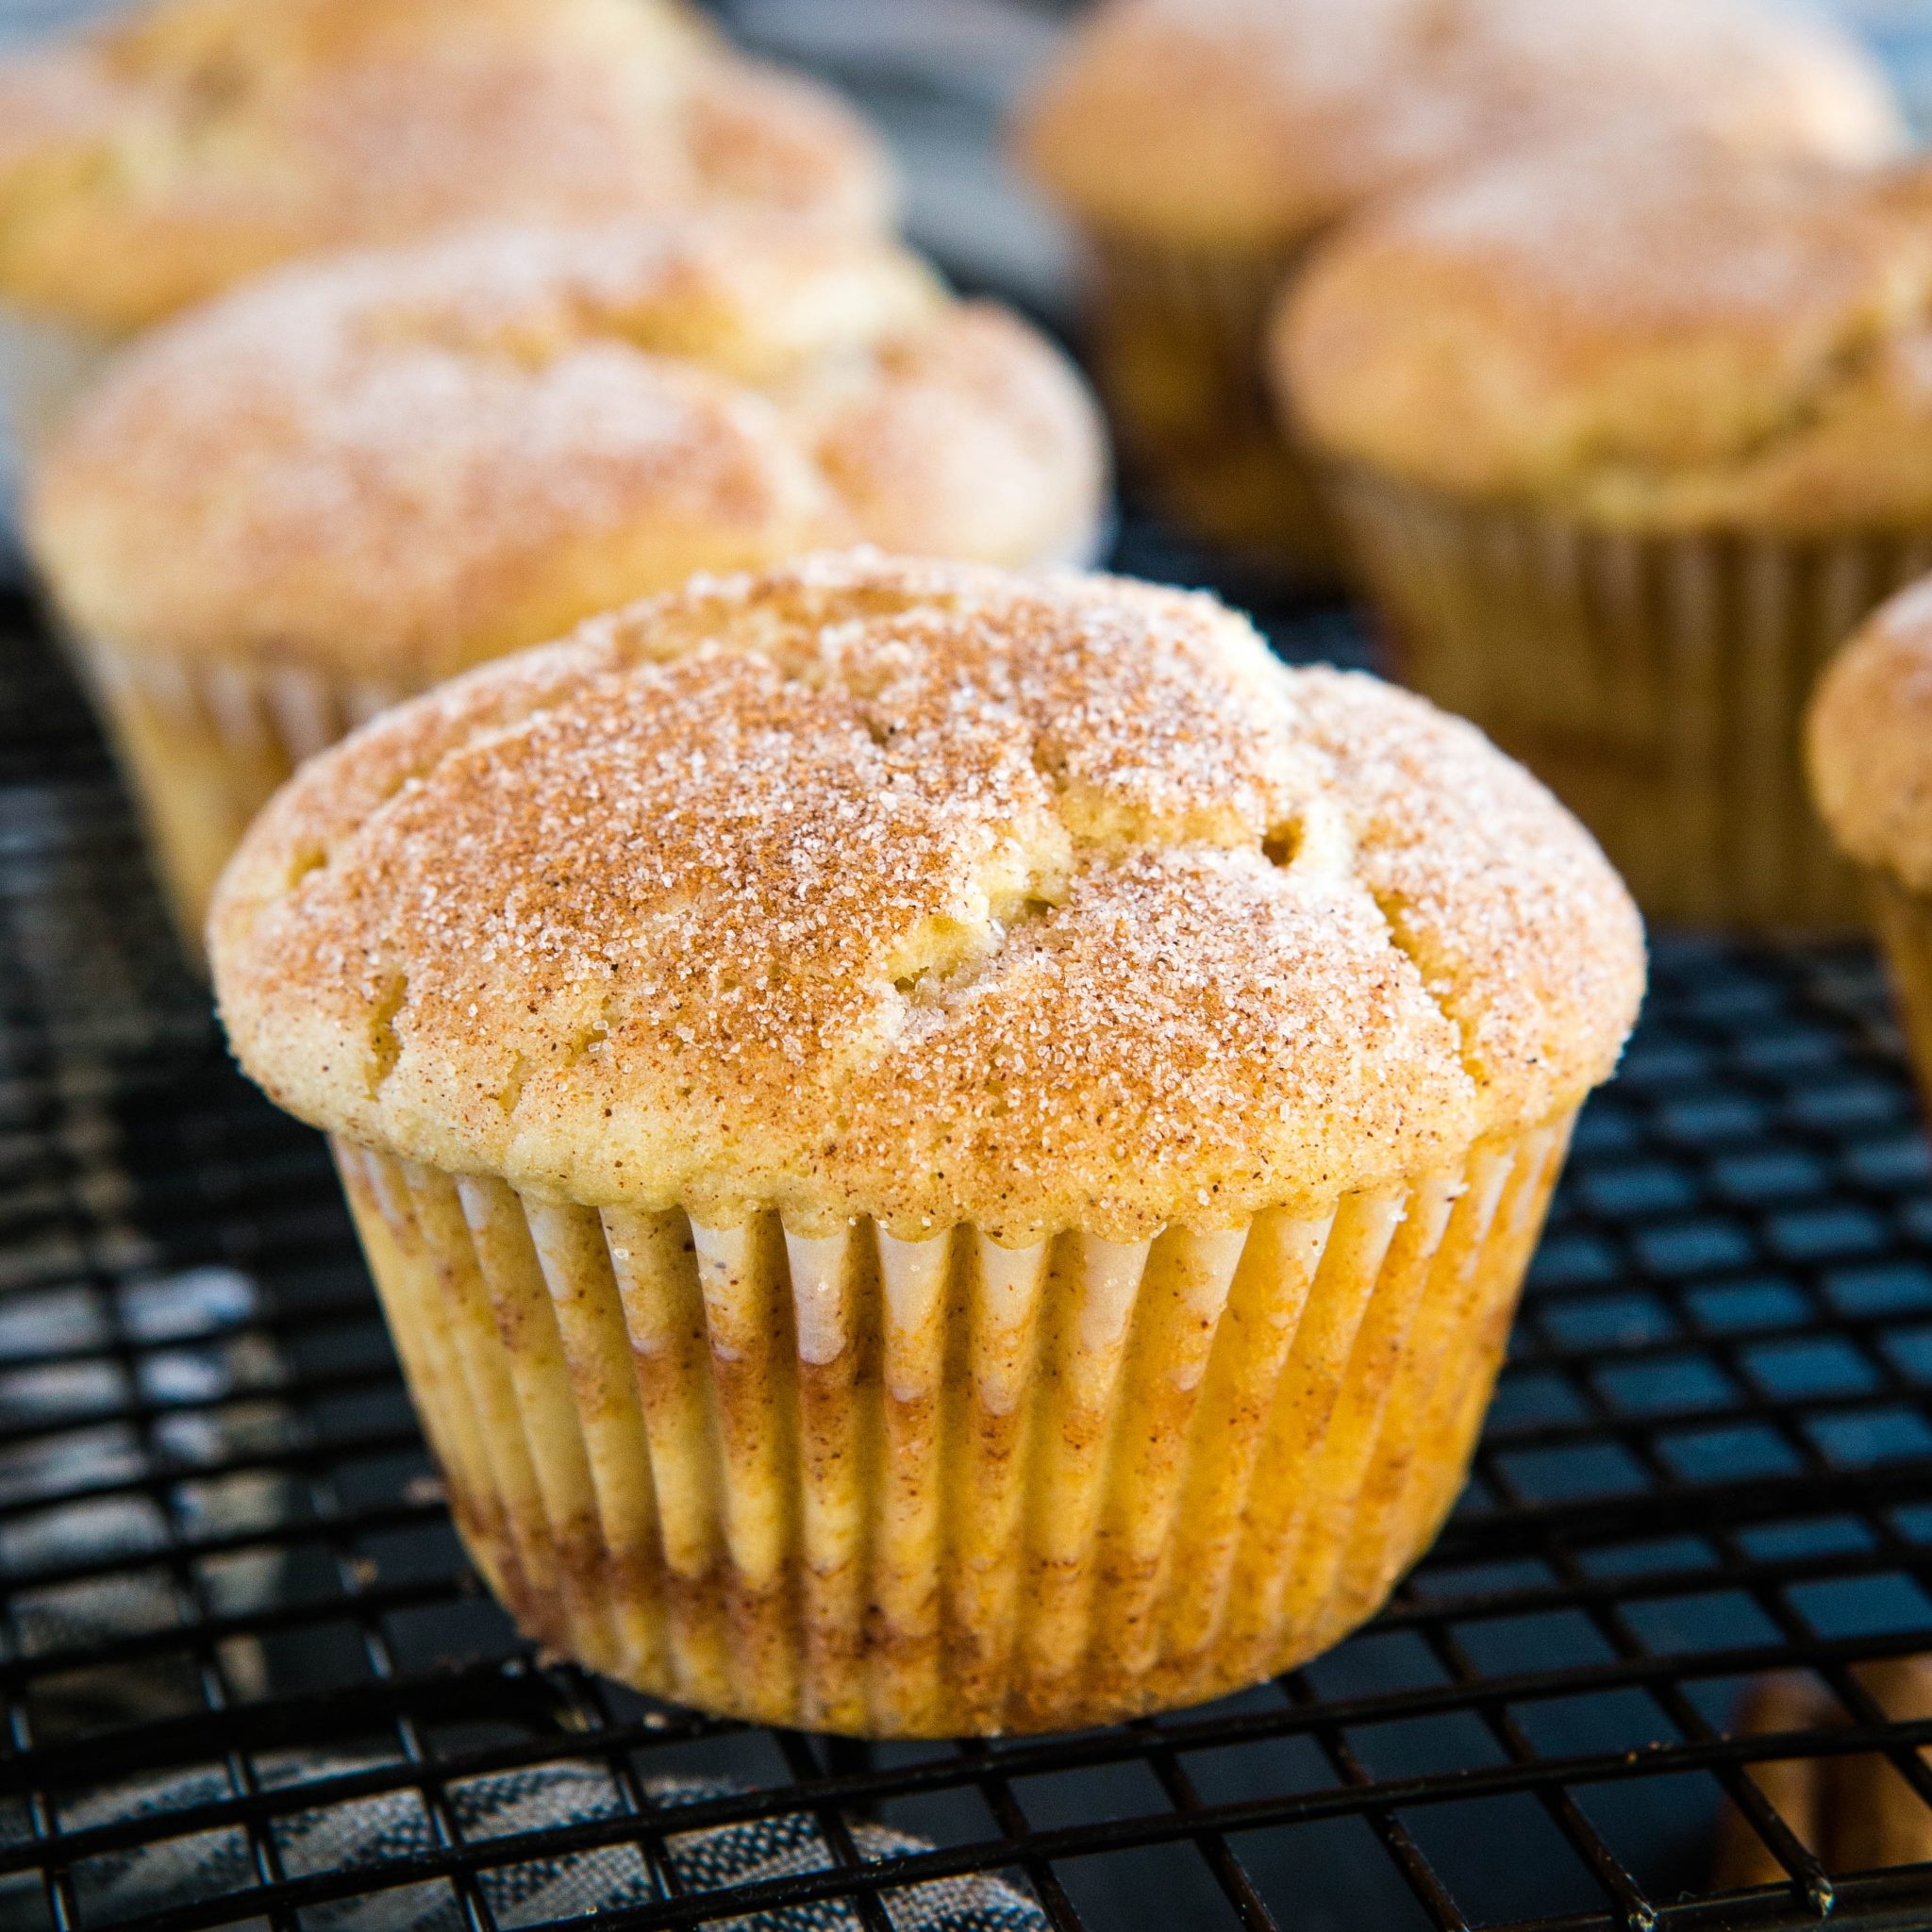 Muffin: Baked in shallow, cylindrical pans with individual cups. 2050x2050 HD Wallpaper.